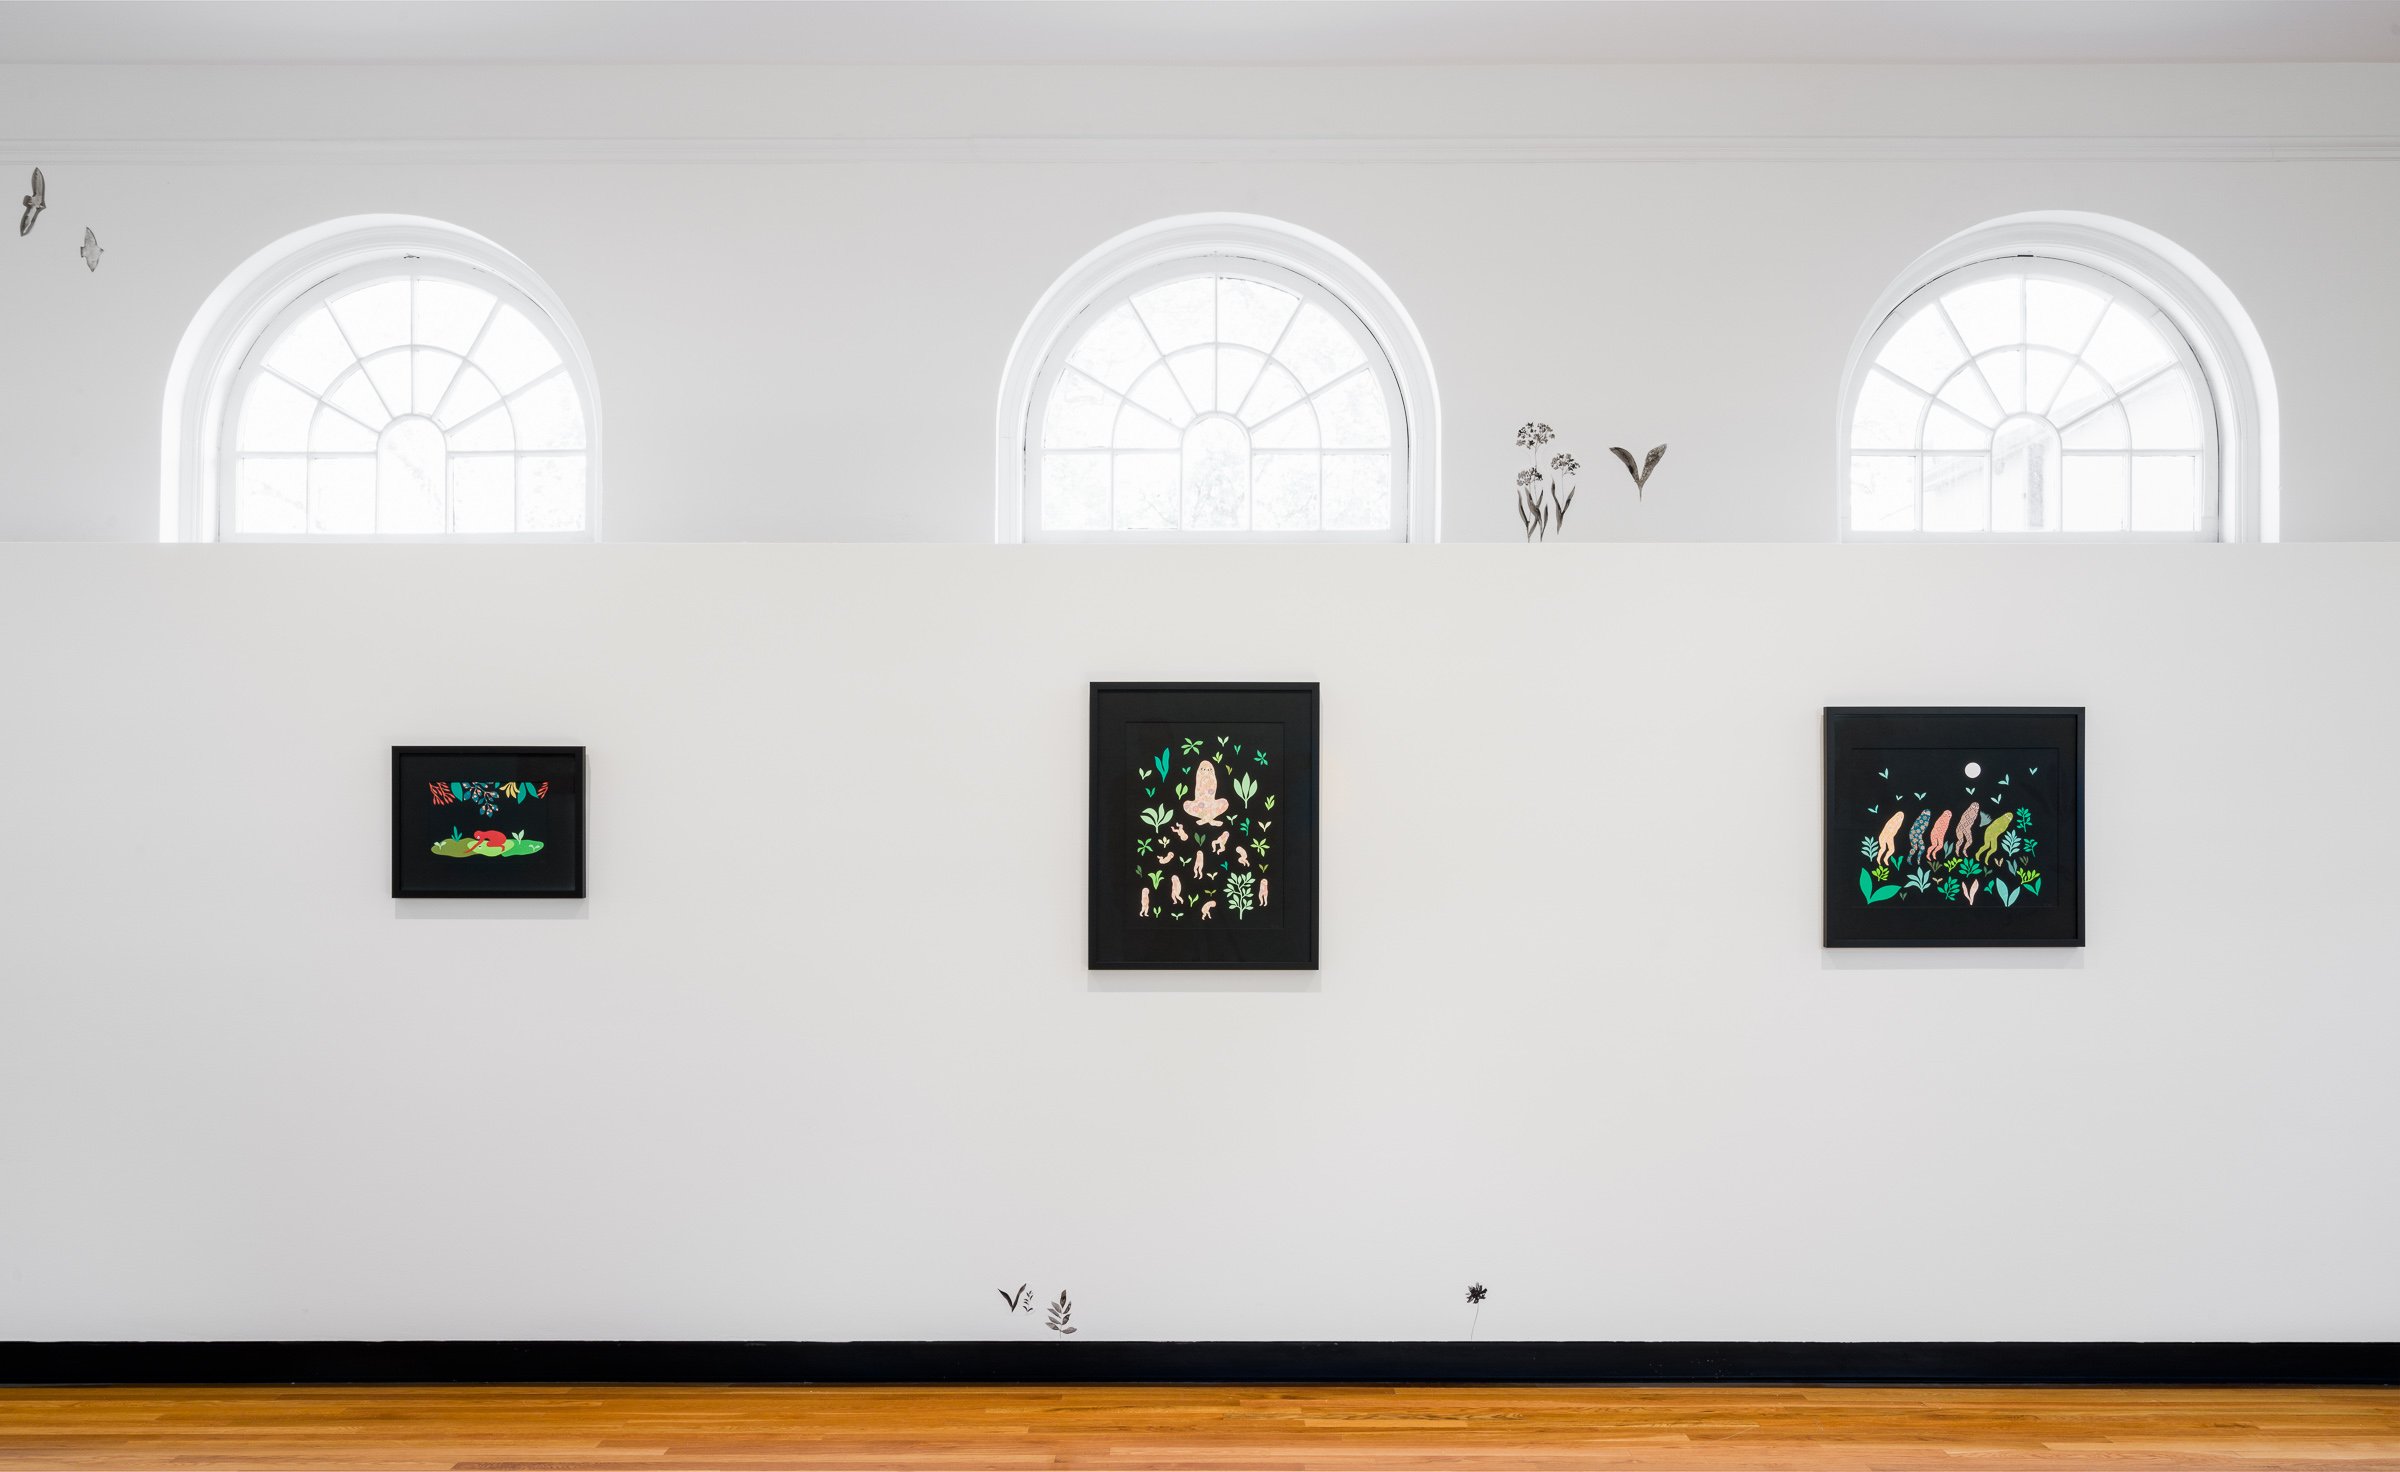  Installation view of  Gathering near and far, still  by April Matisz showing (l to r)   A Kind of Sentience,  collage on paper, 2020;  The Mother,  collage on paper, 2020; and  Night Migration 3,  collage on paper, 2020. Courtesy of the artist. Phot